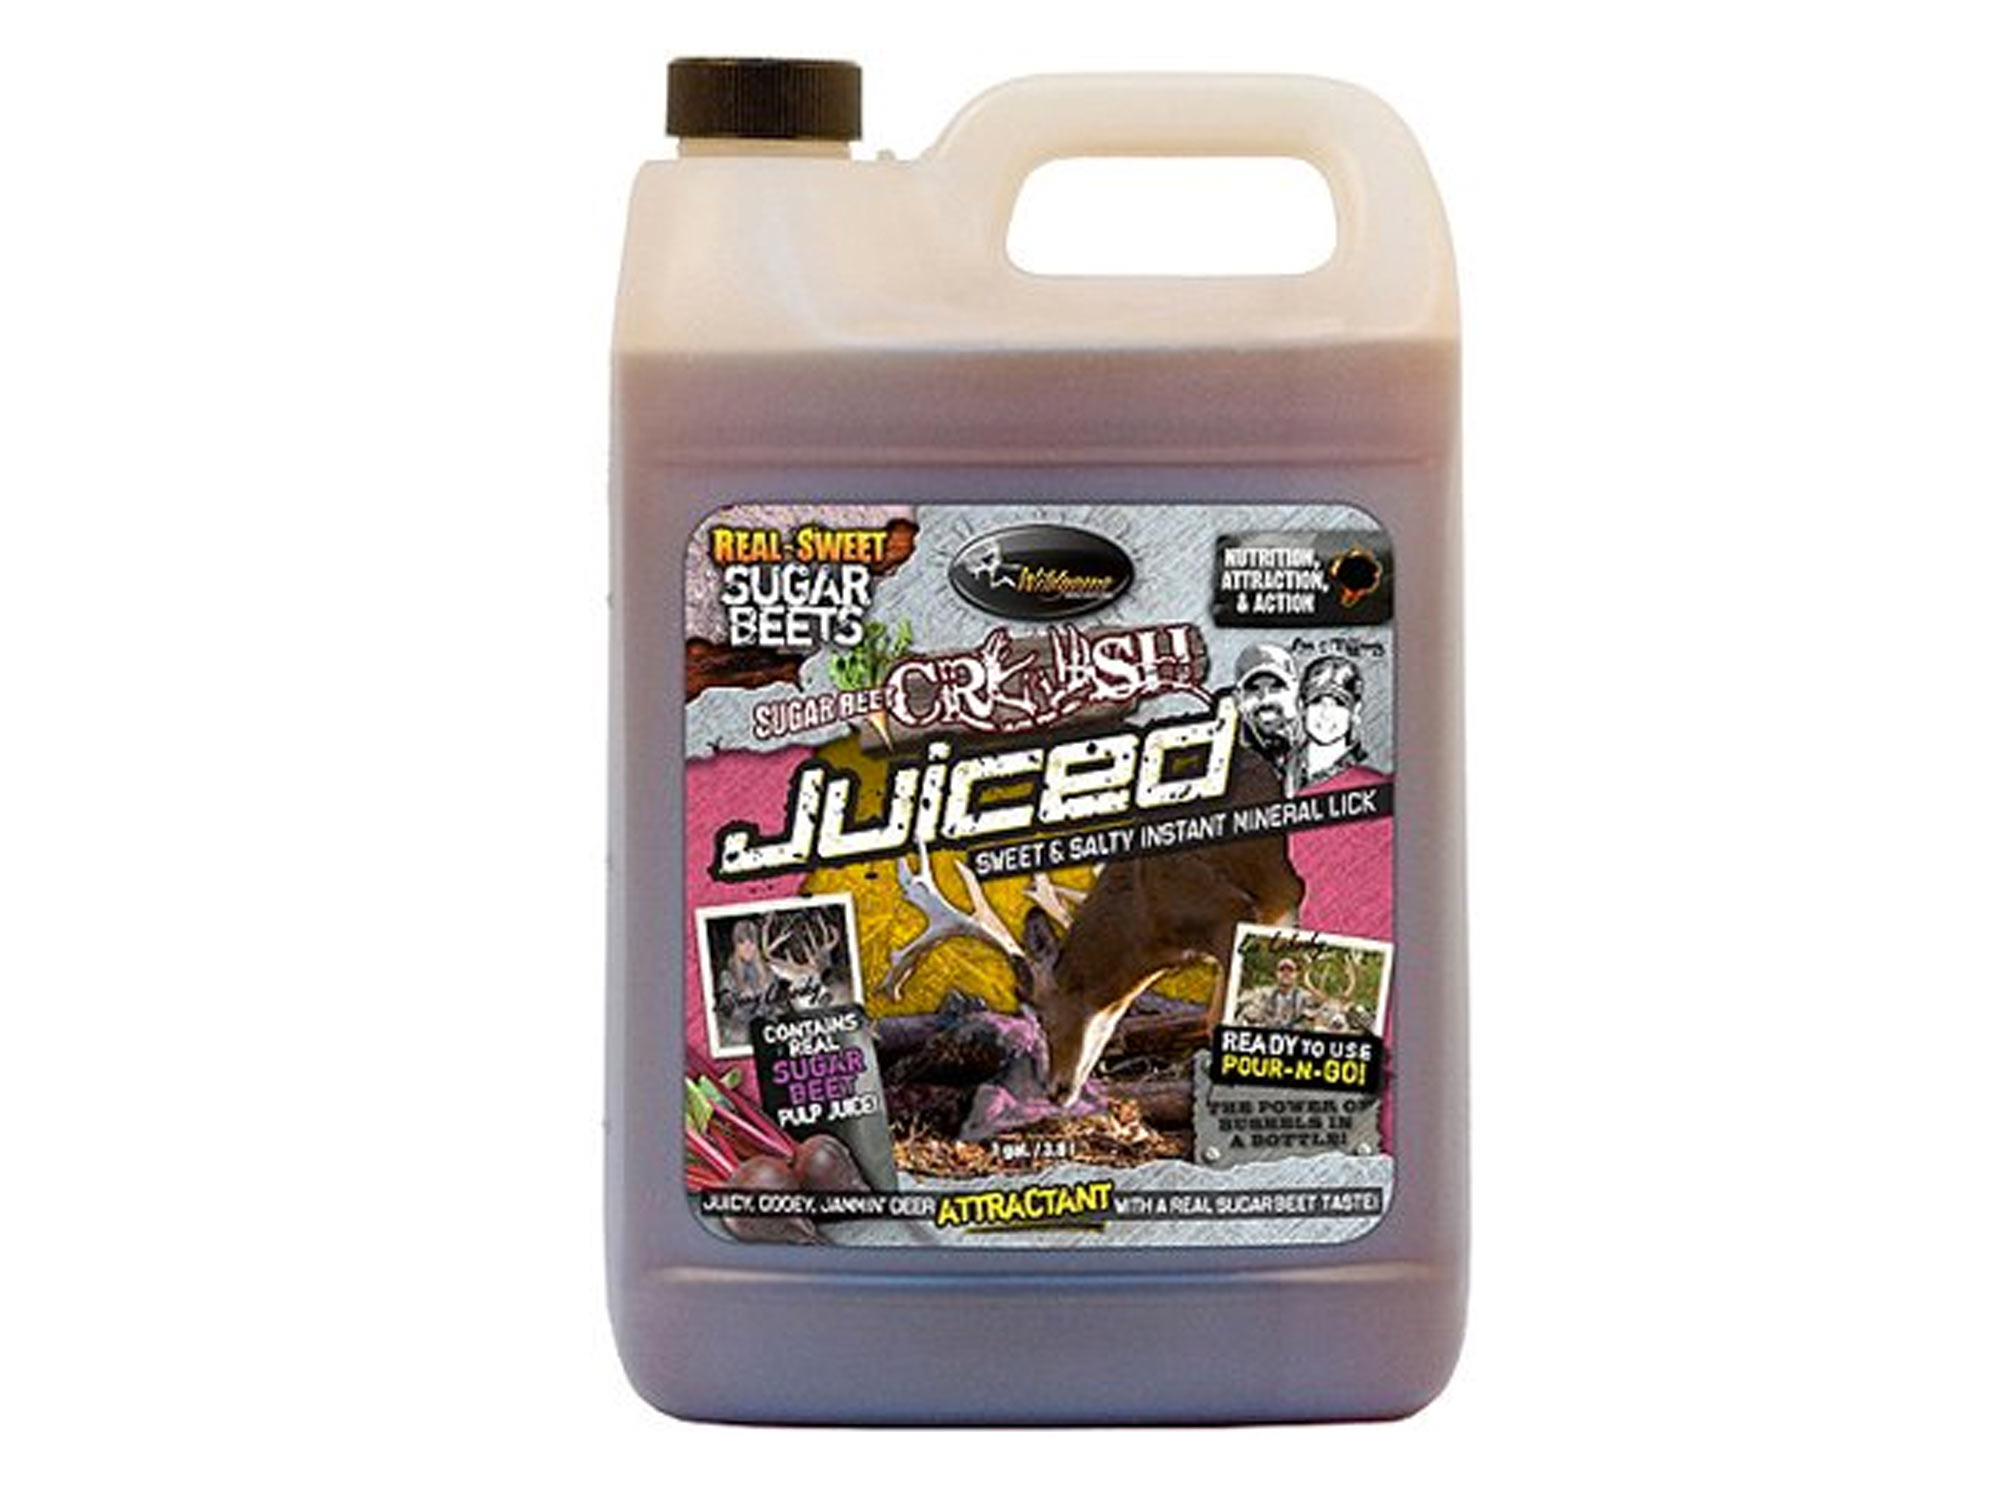 Sugar Beet Crushed Juiced attractant